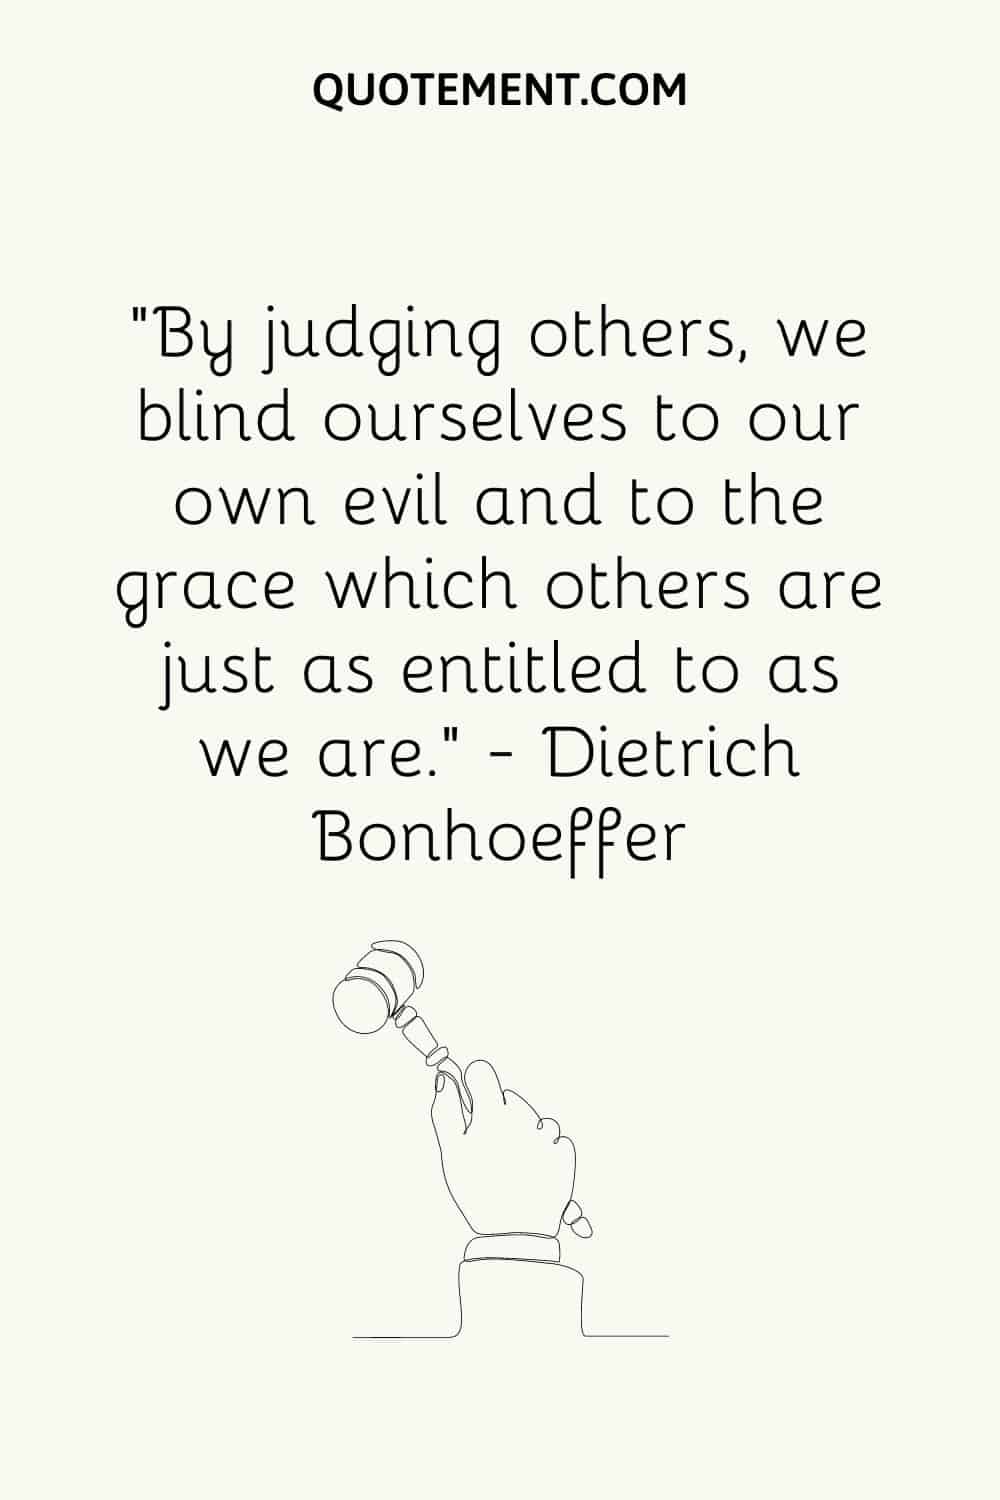 “By judging others, we blind ourselves to our own evil and to the grace which others are just as entitled to as we are.” ― Dietrich Bonhoeffer